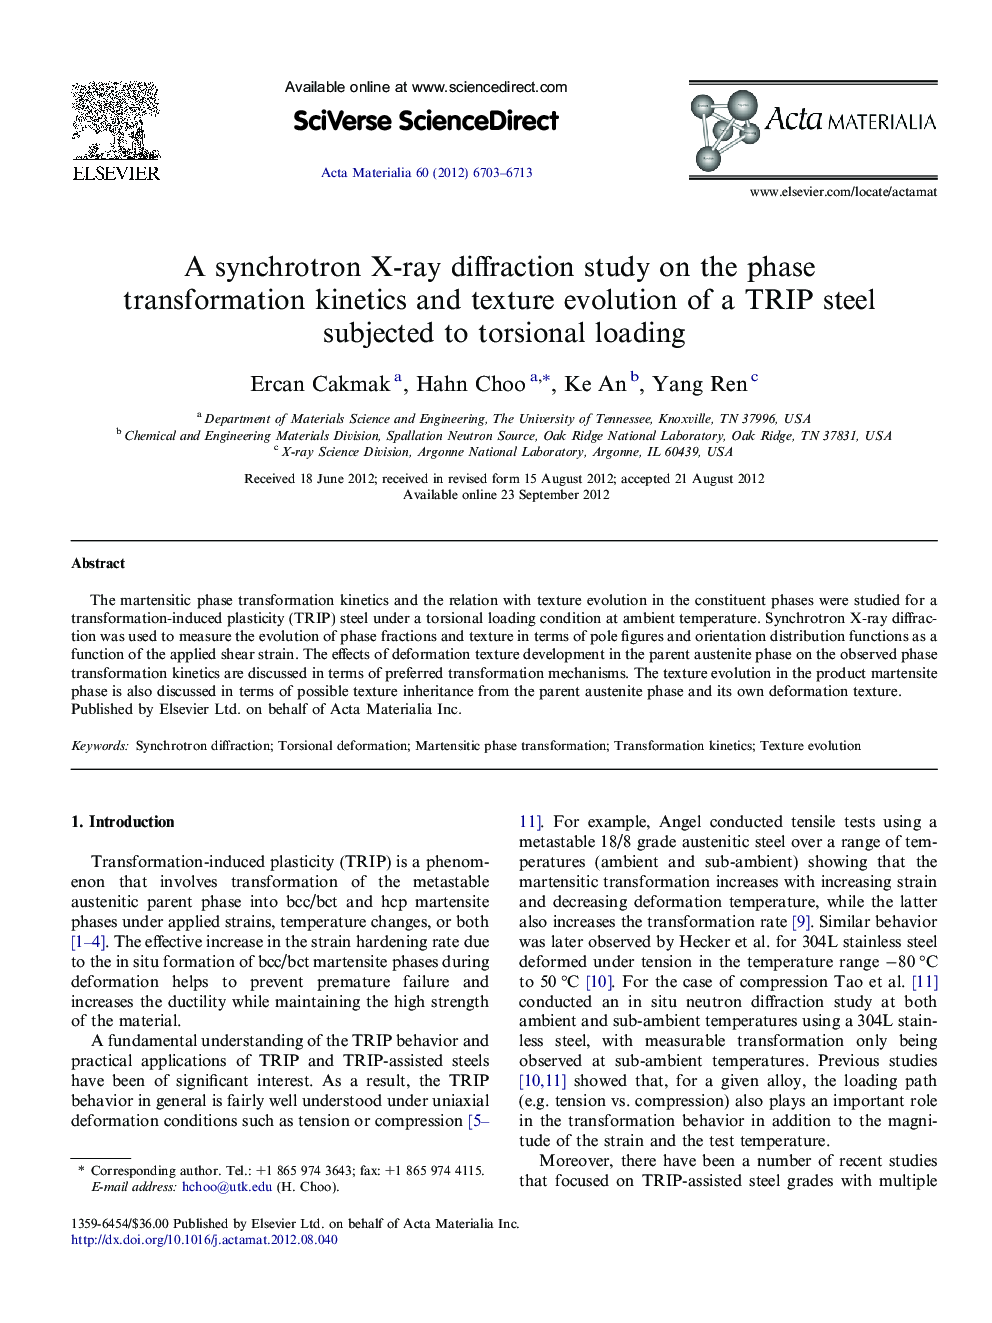 A synchrotron X-ray diffraction study on the phase transformation kinetics and texture evolution of a TRIP steel subjected to torsional loading